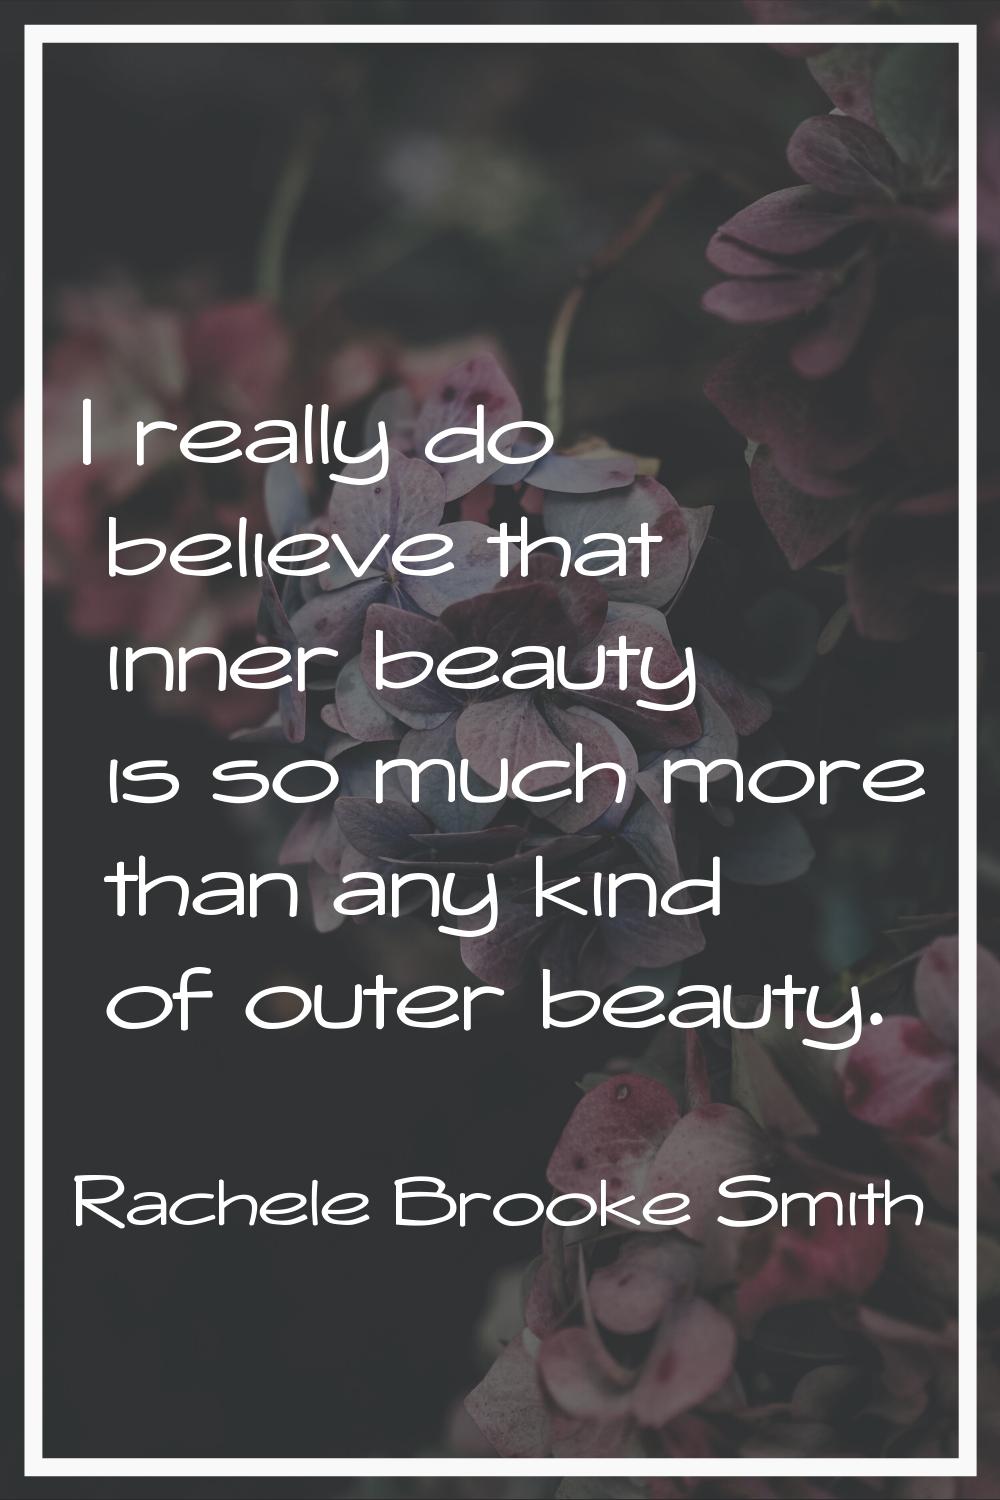 I really do believe that inner beauty is so much more than any kind of outer beauty.